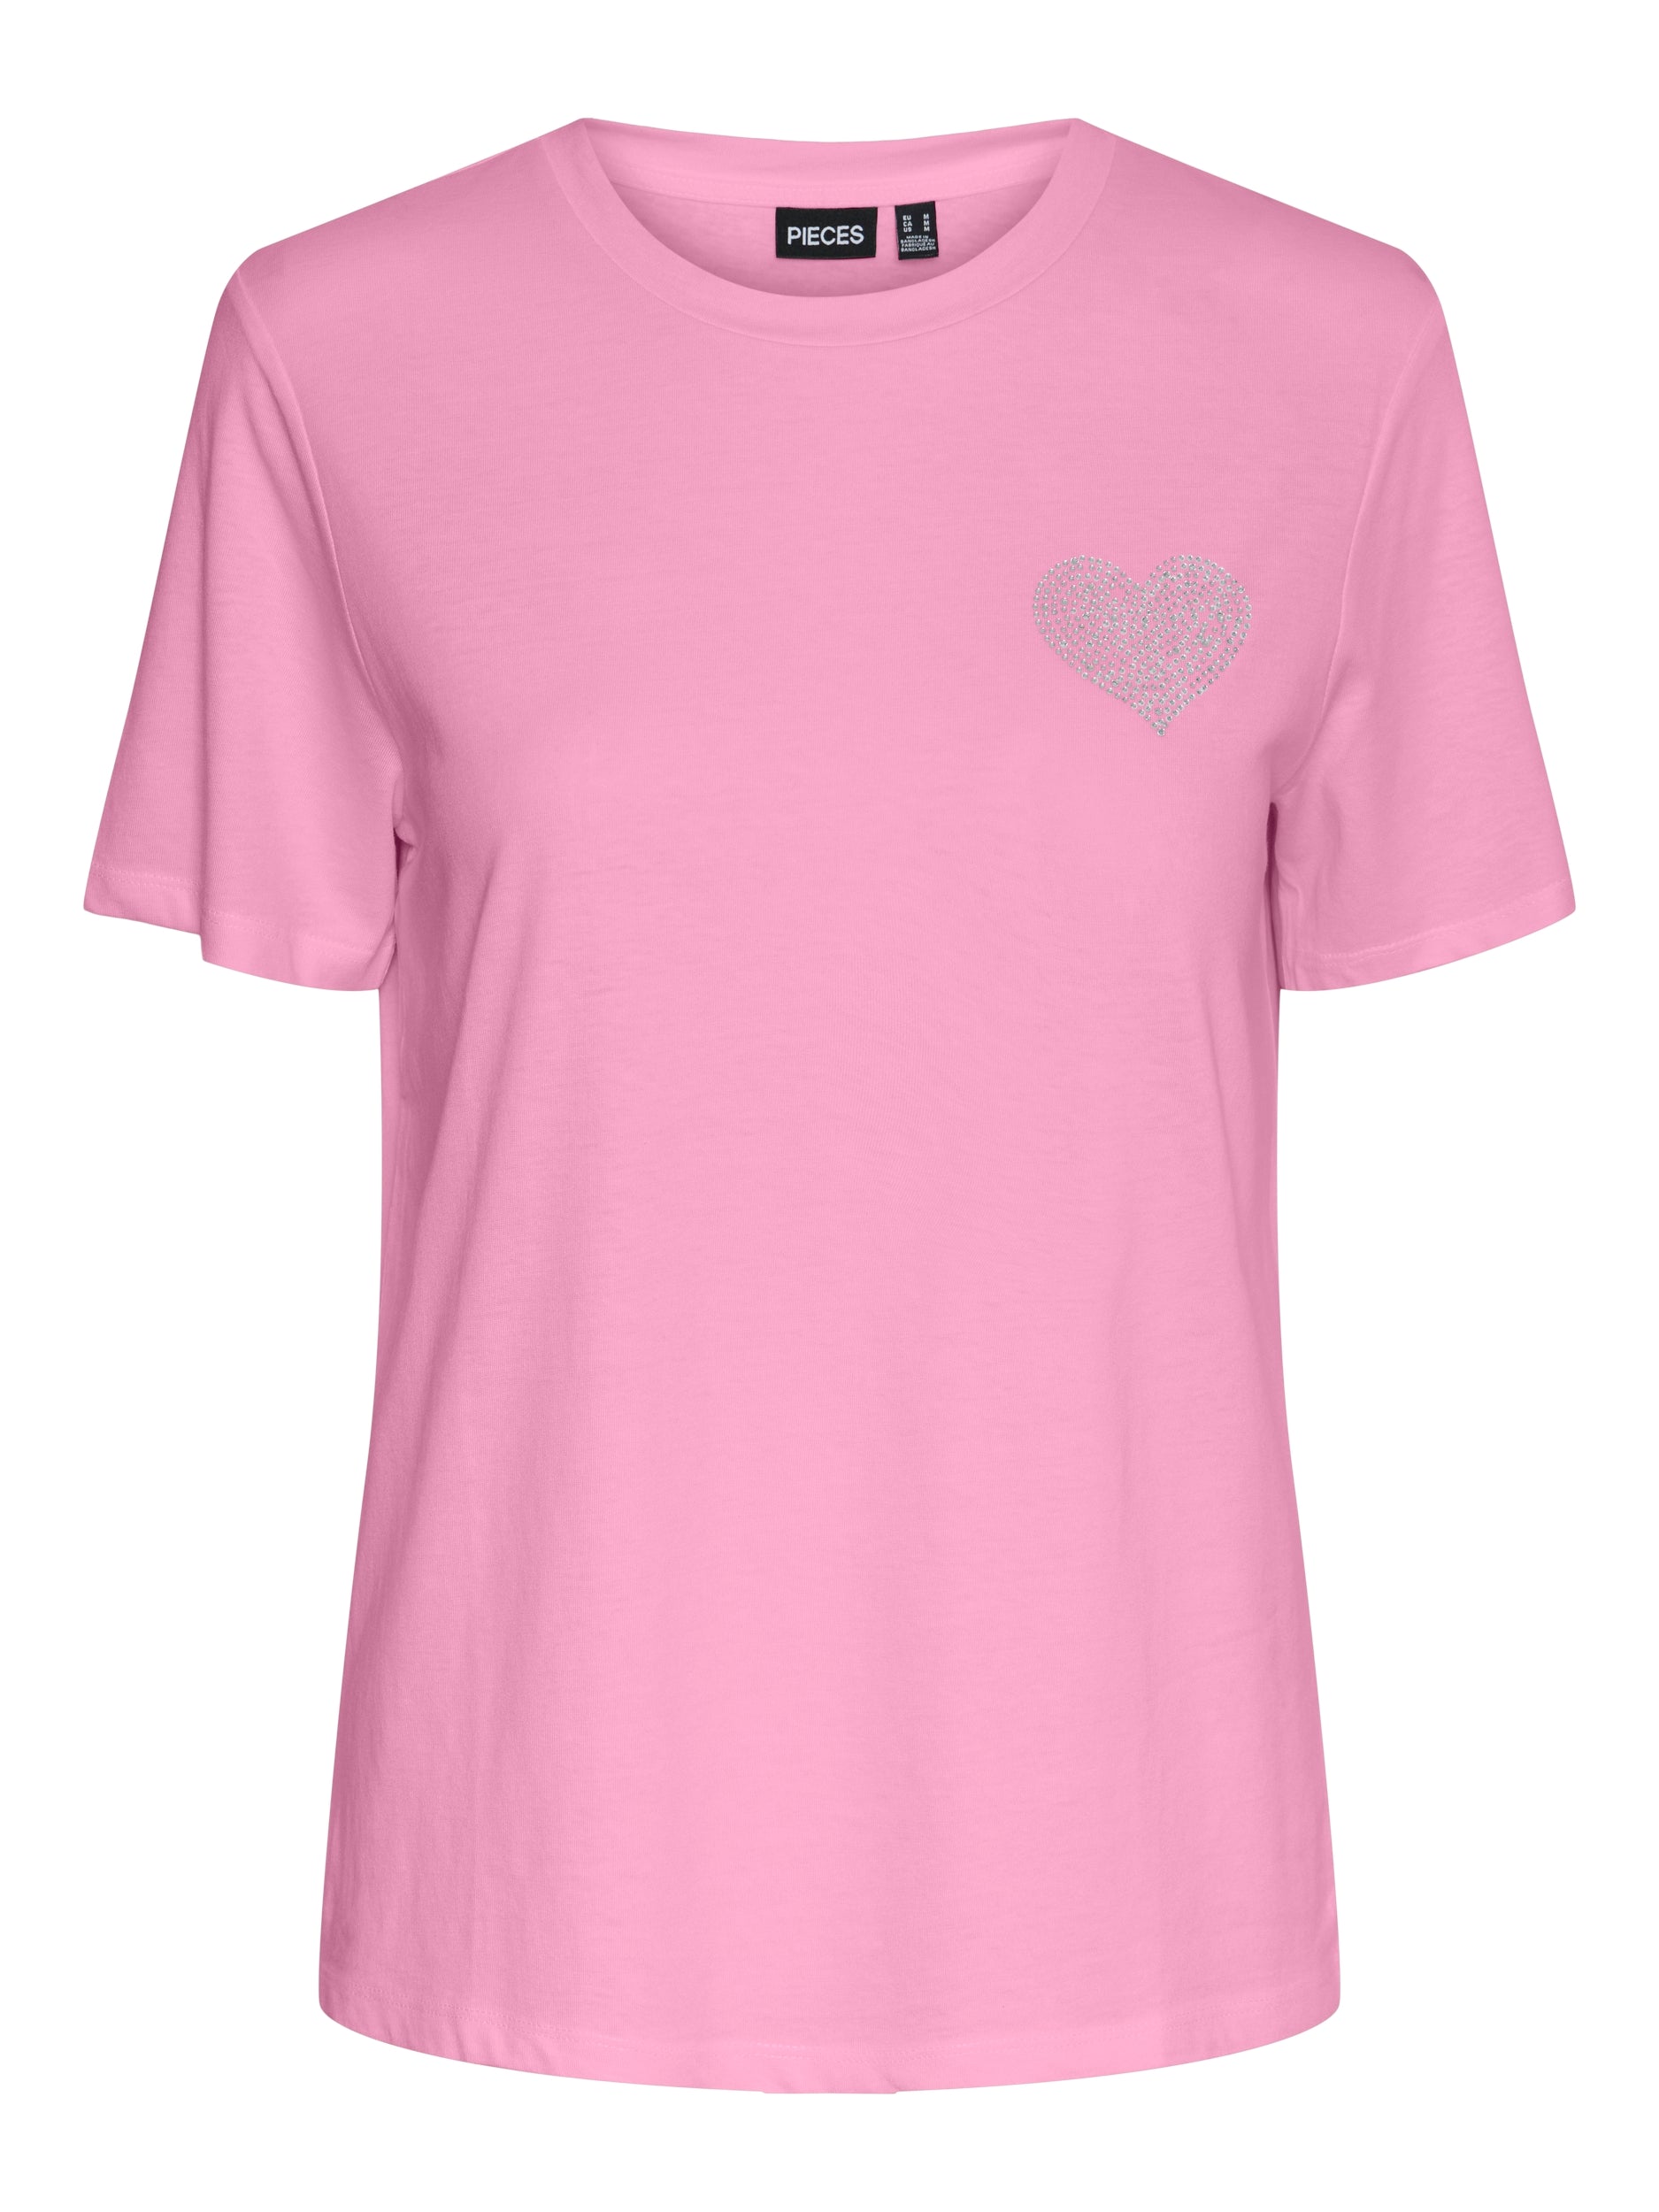 Pieces t-shirt rosa stampa cuore con strass